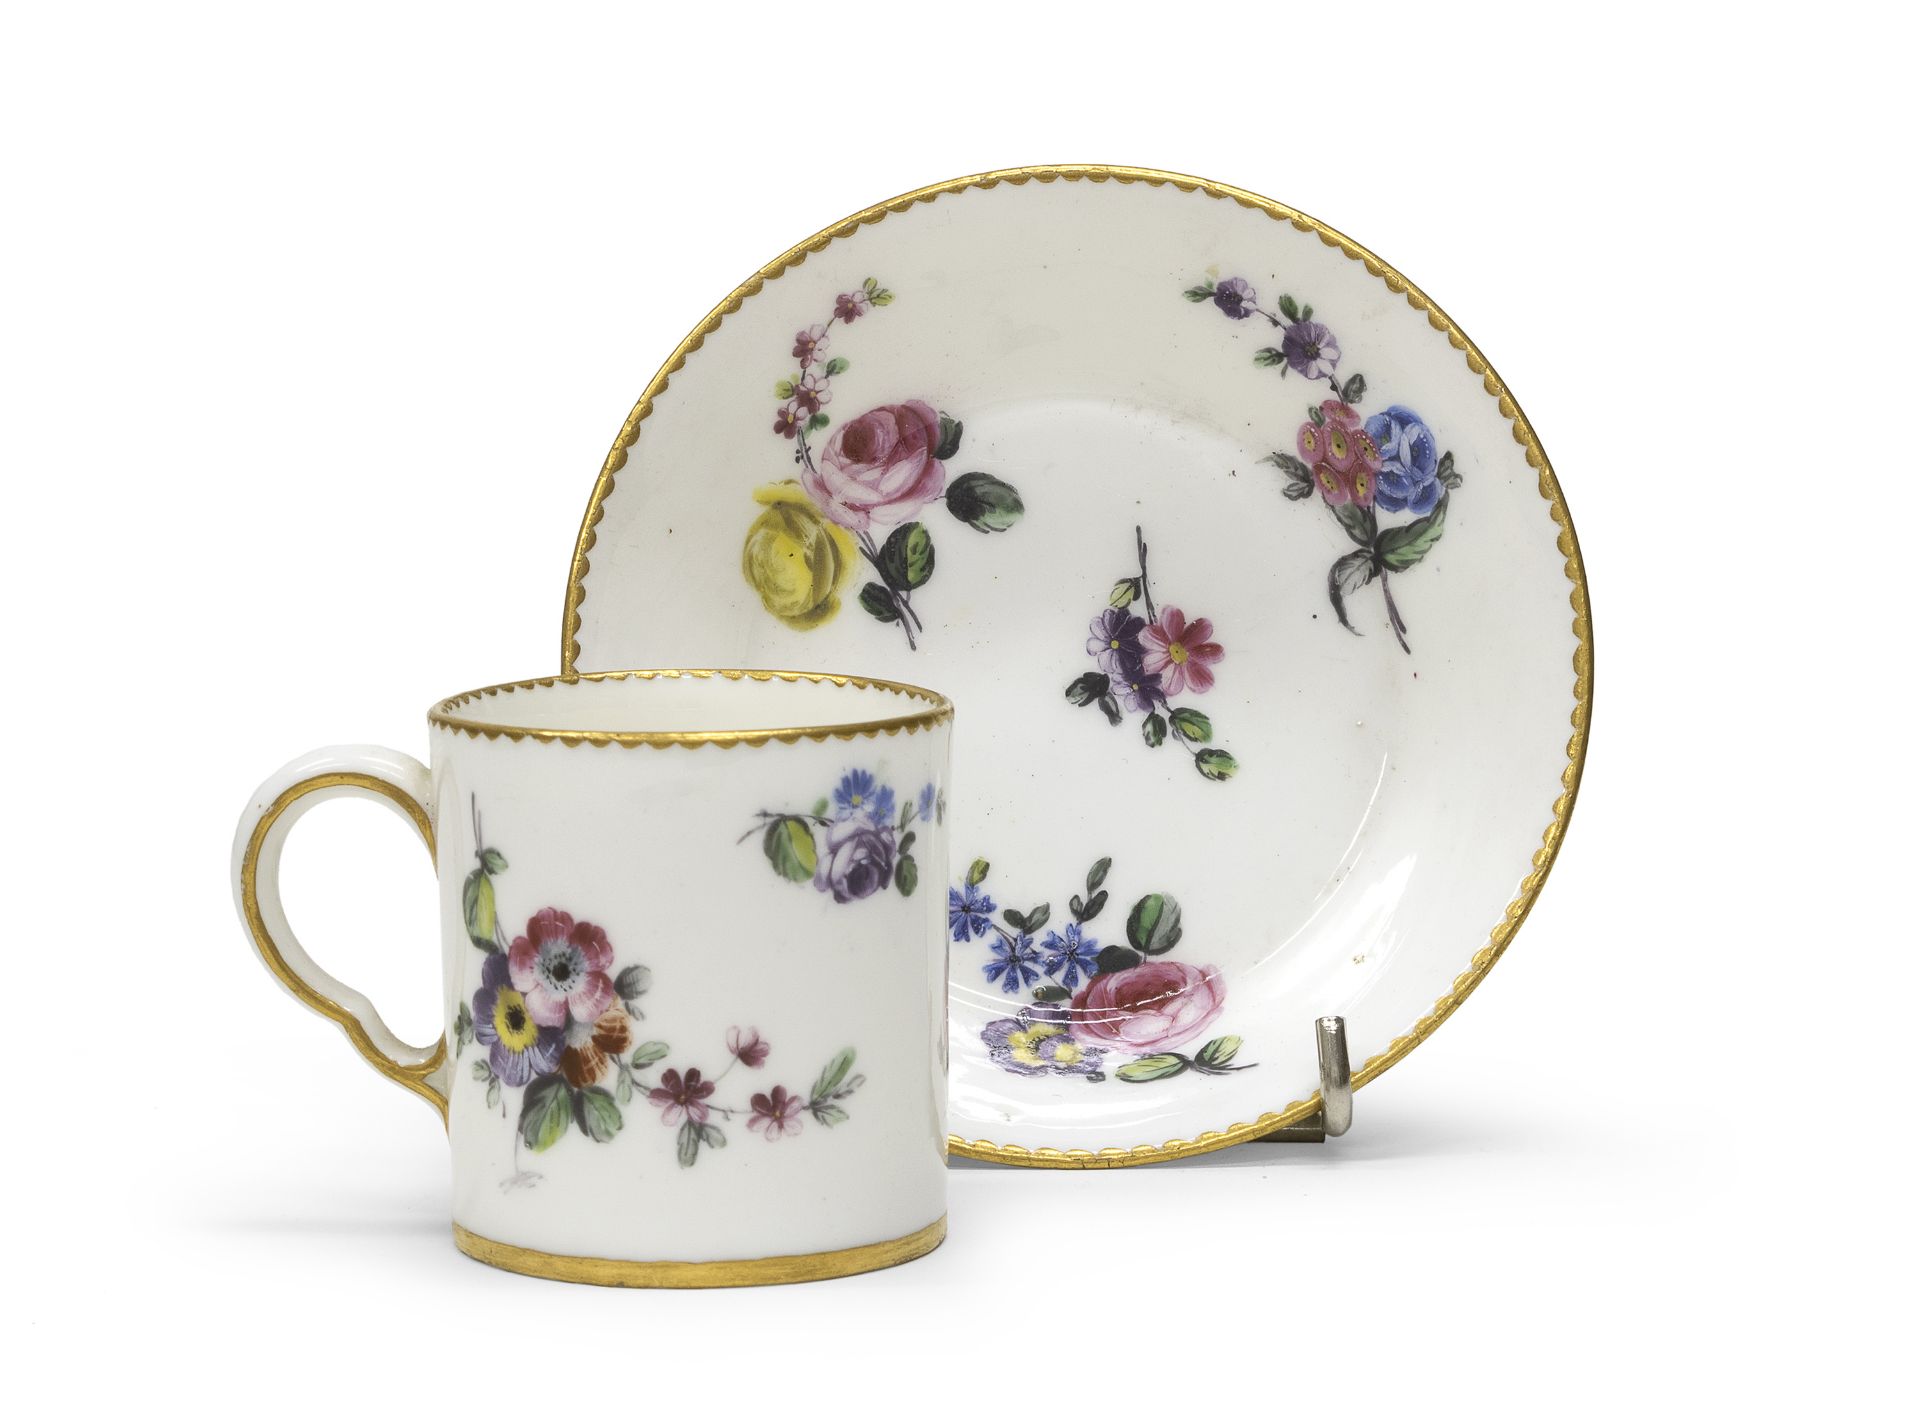 PORCELAIN CUP AND SAUCER SEVRES END OF THE 18TH CENTURY